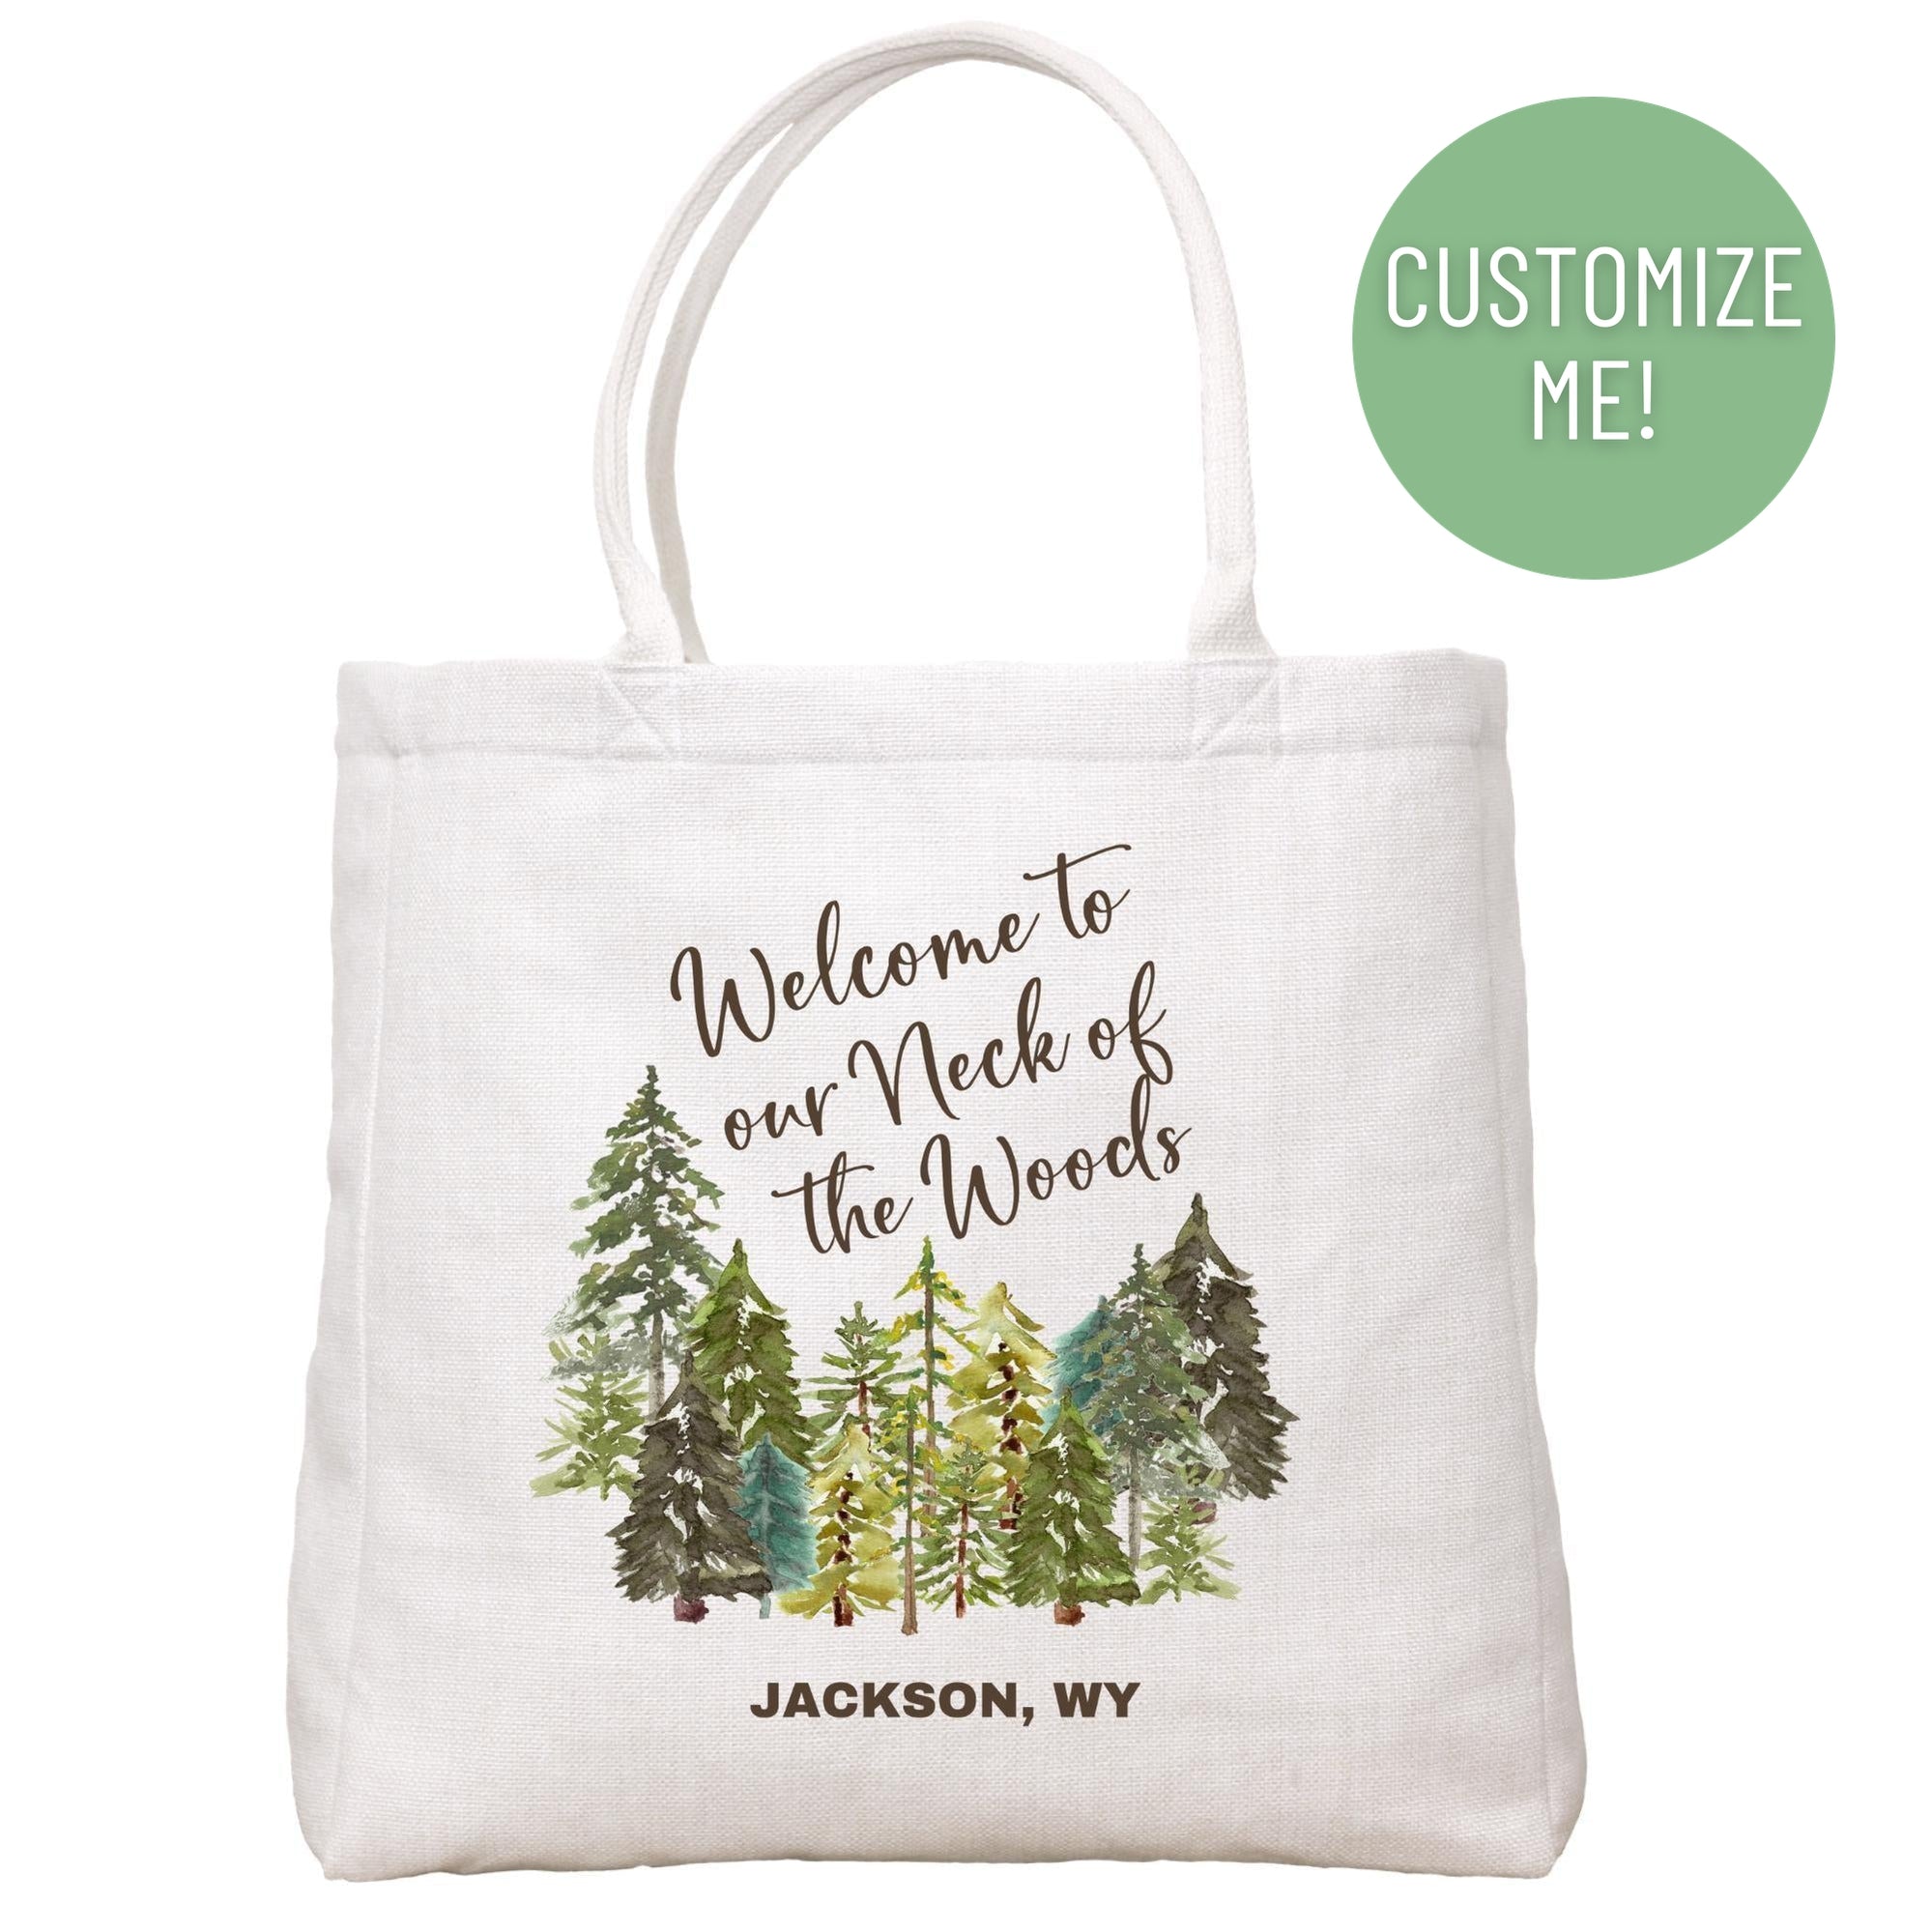 Neck of the Woods Tote Bag